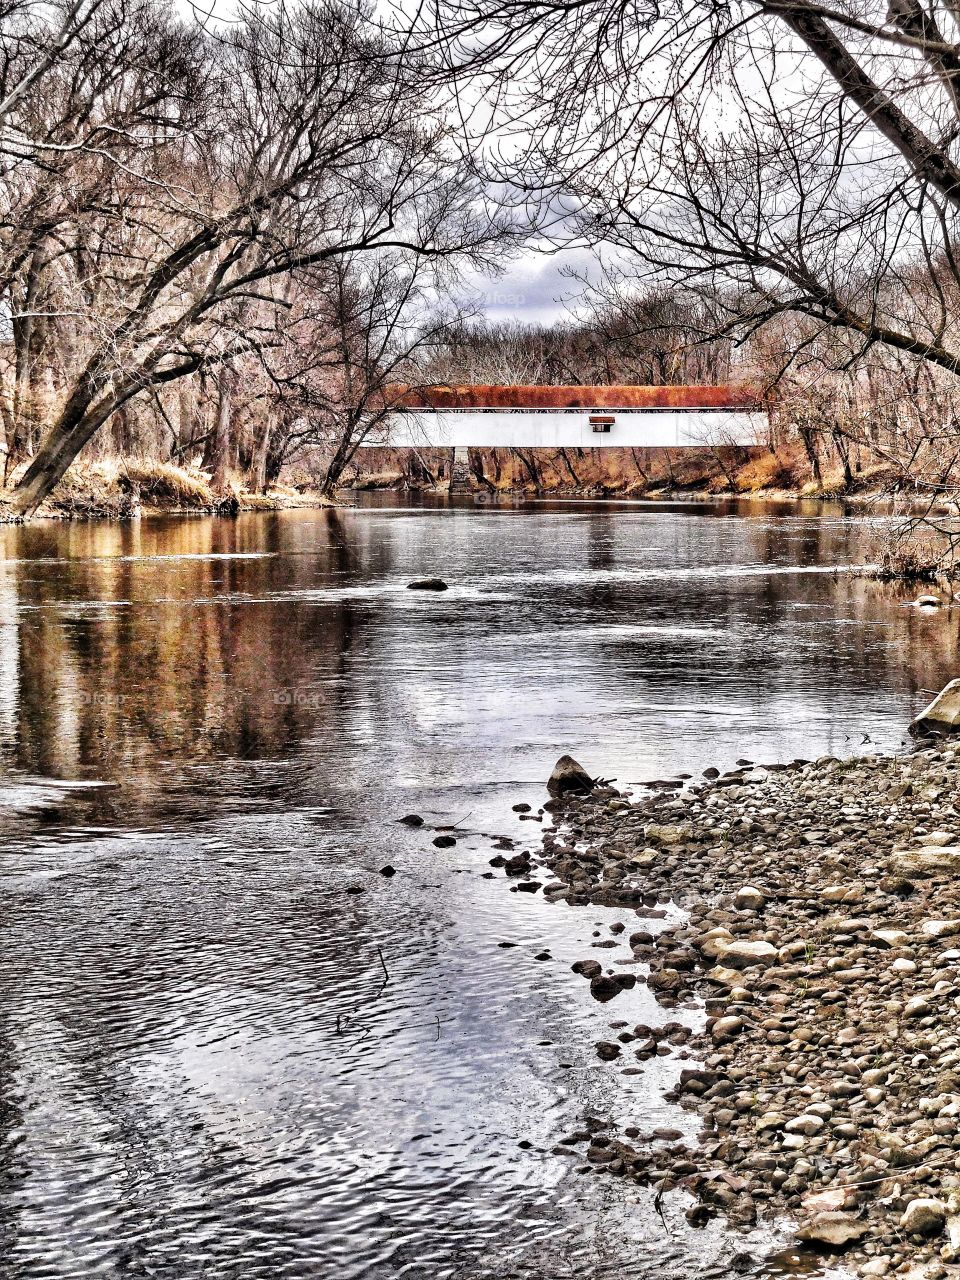 Covered bridge on the river. 